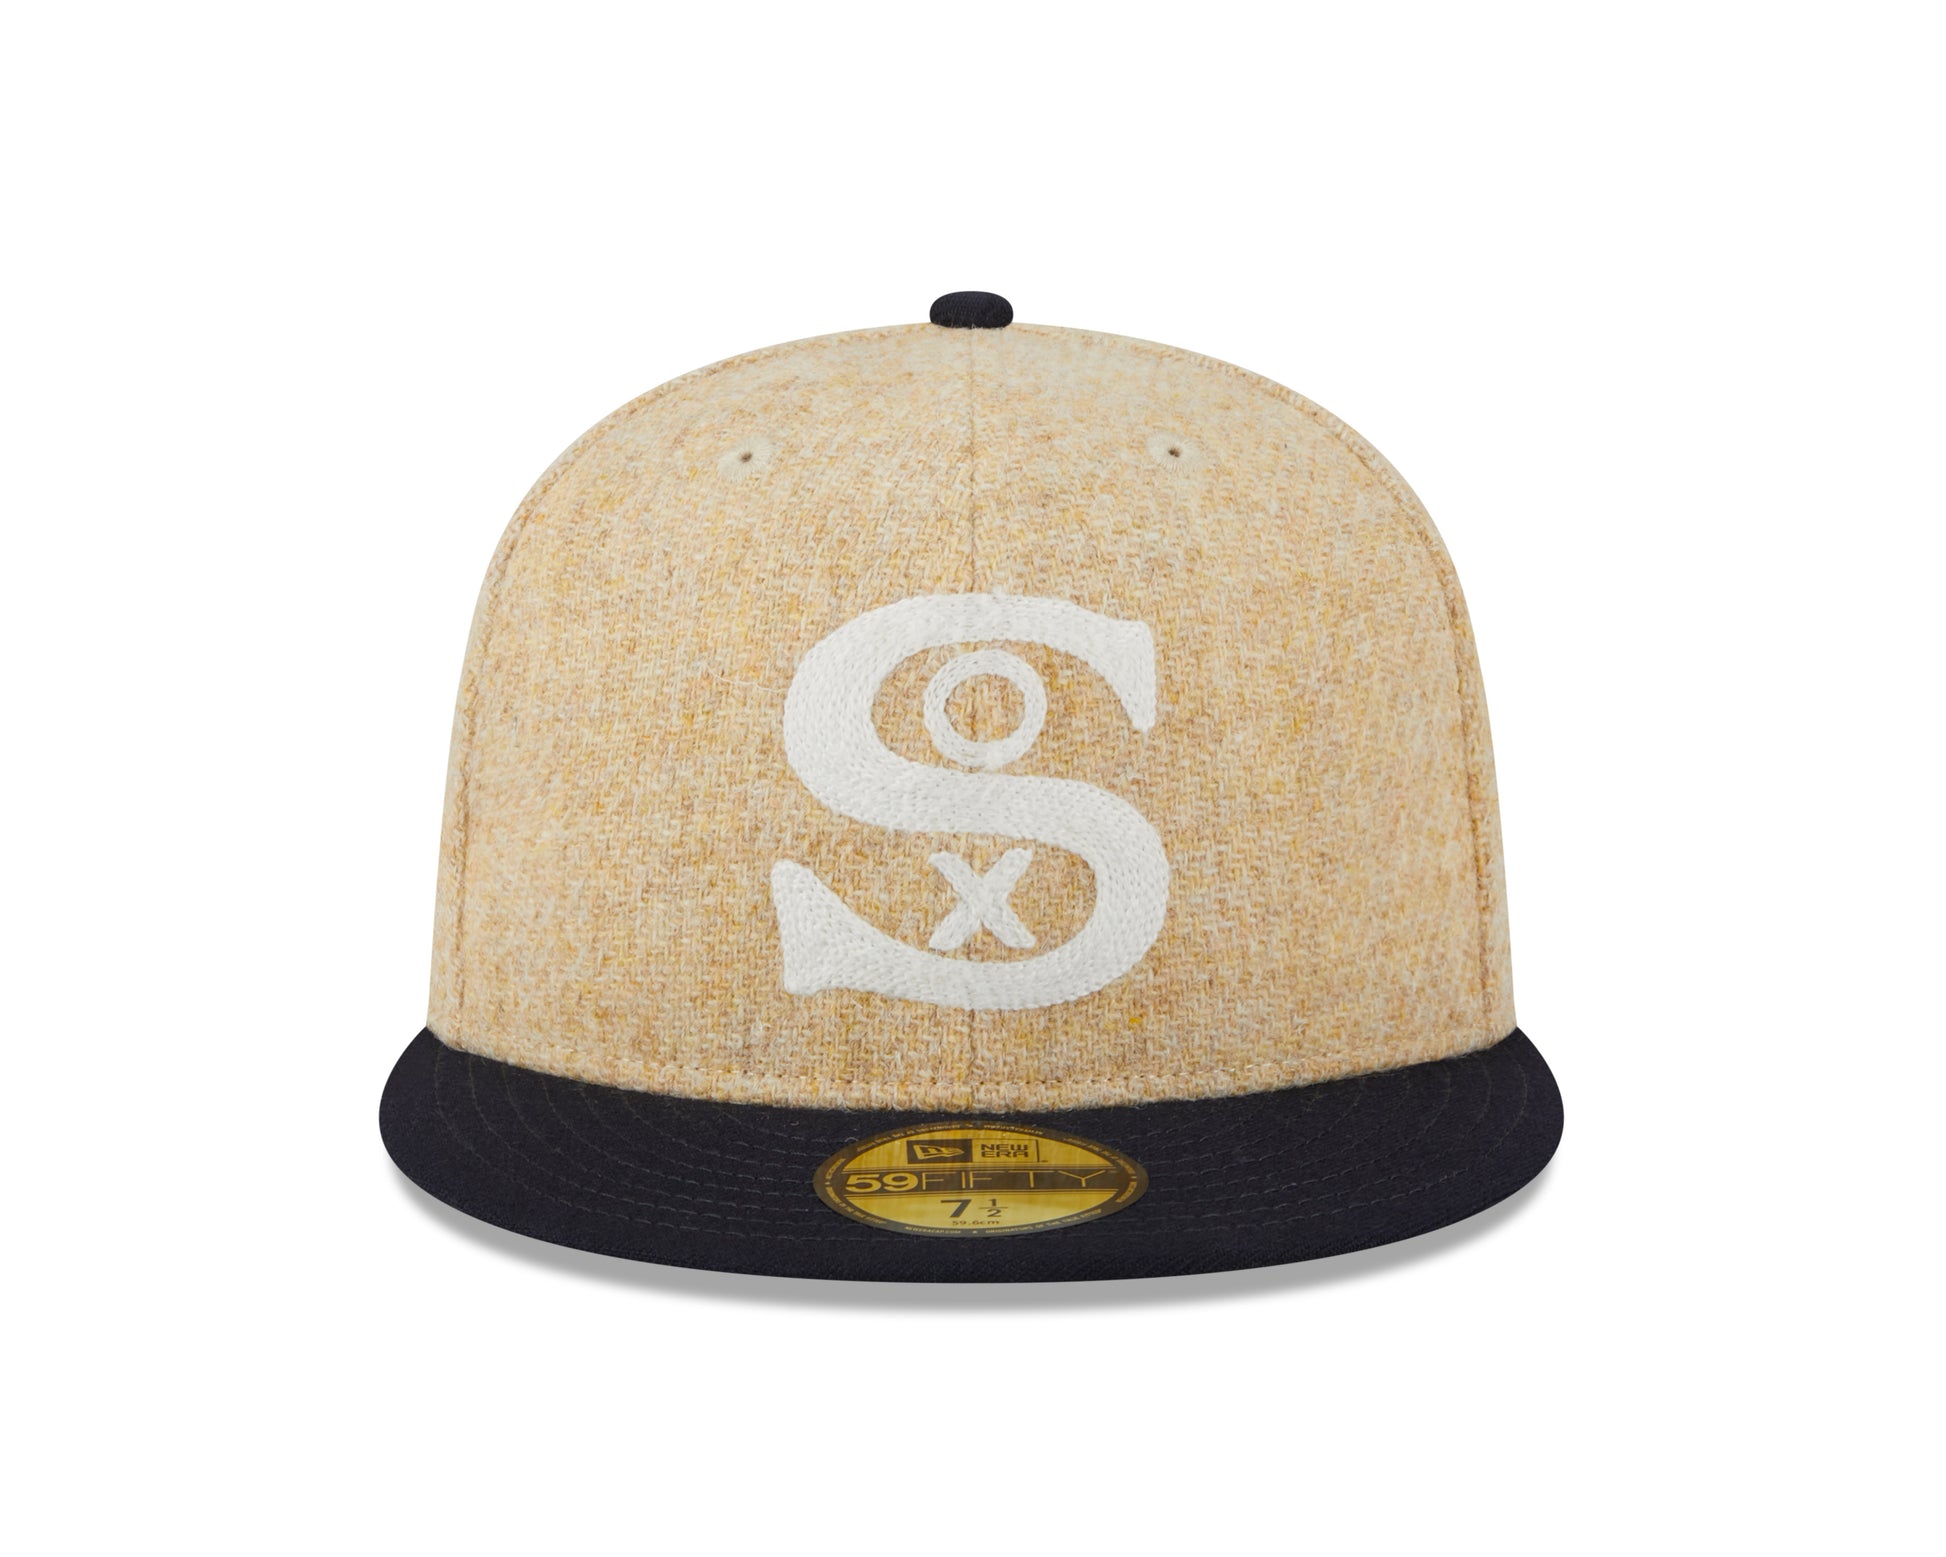 New Era - 59Fifty Fitted Cap - HARRIS TWEED - Chicago White Sox - XTN - Headz Up 